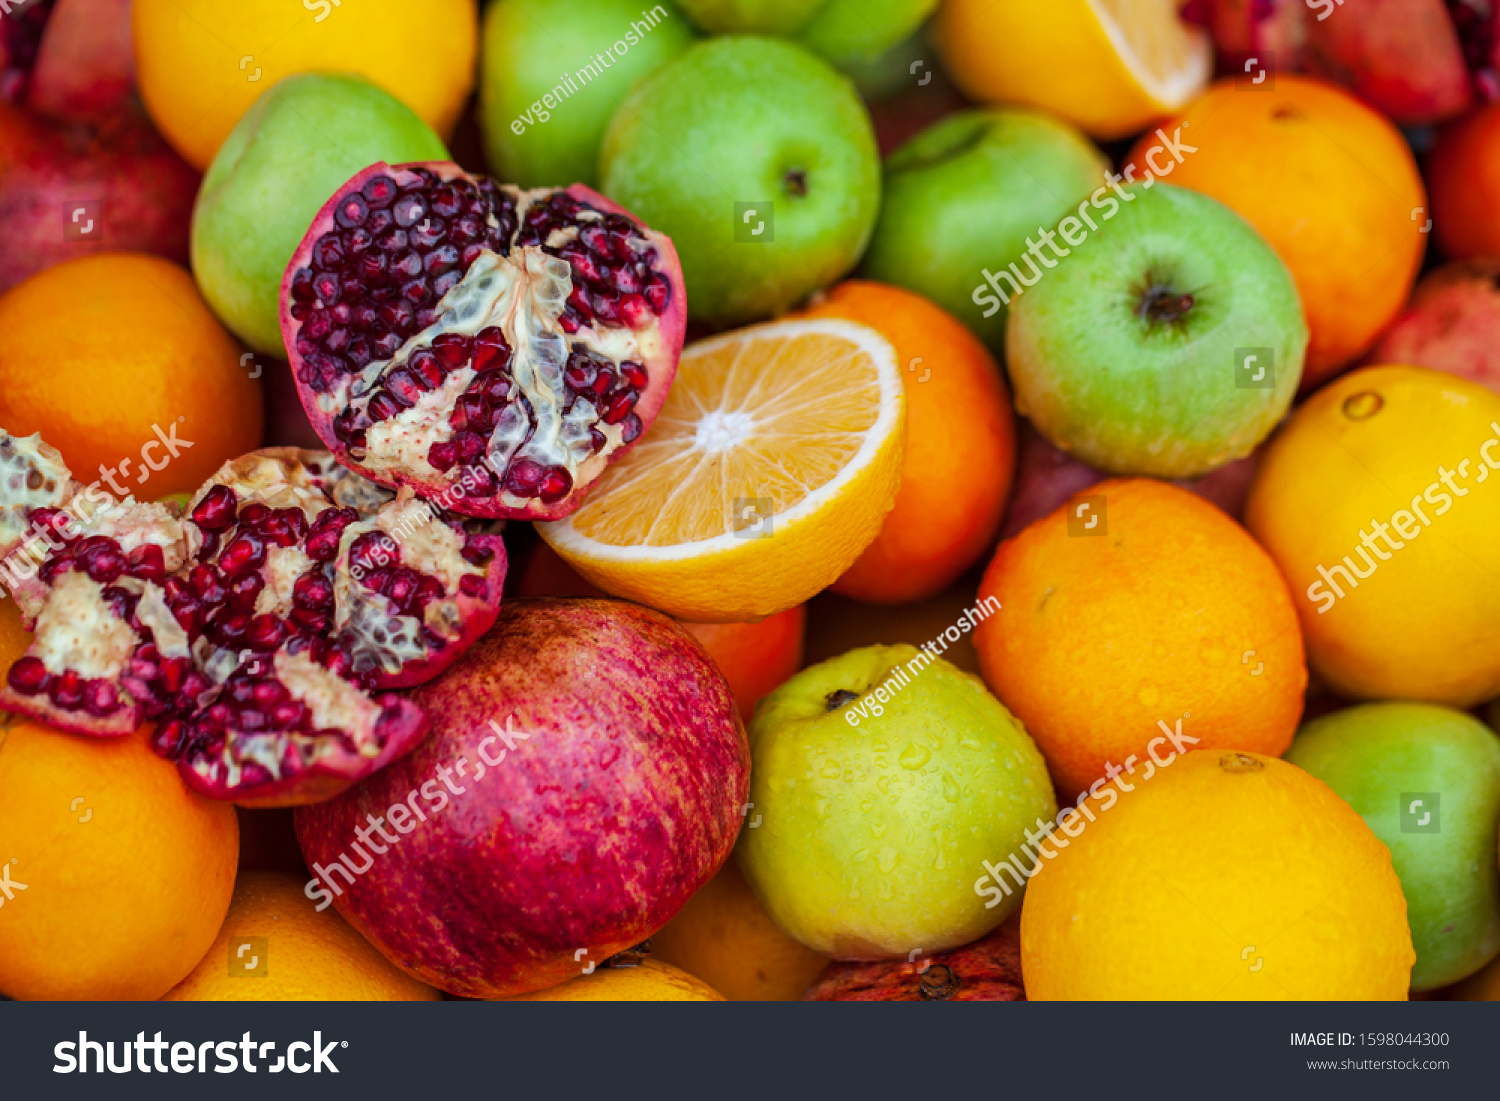 Fruit background, apples, opened pomegranate, orange, Delicious winter fruits on a stall, variety of healthy ripe fruits  #1598044300